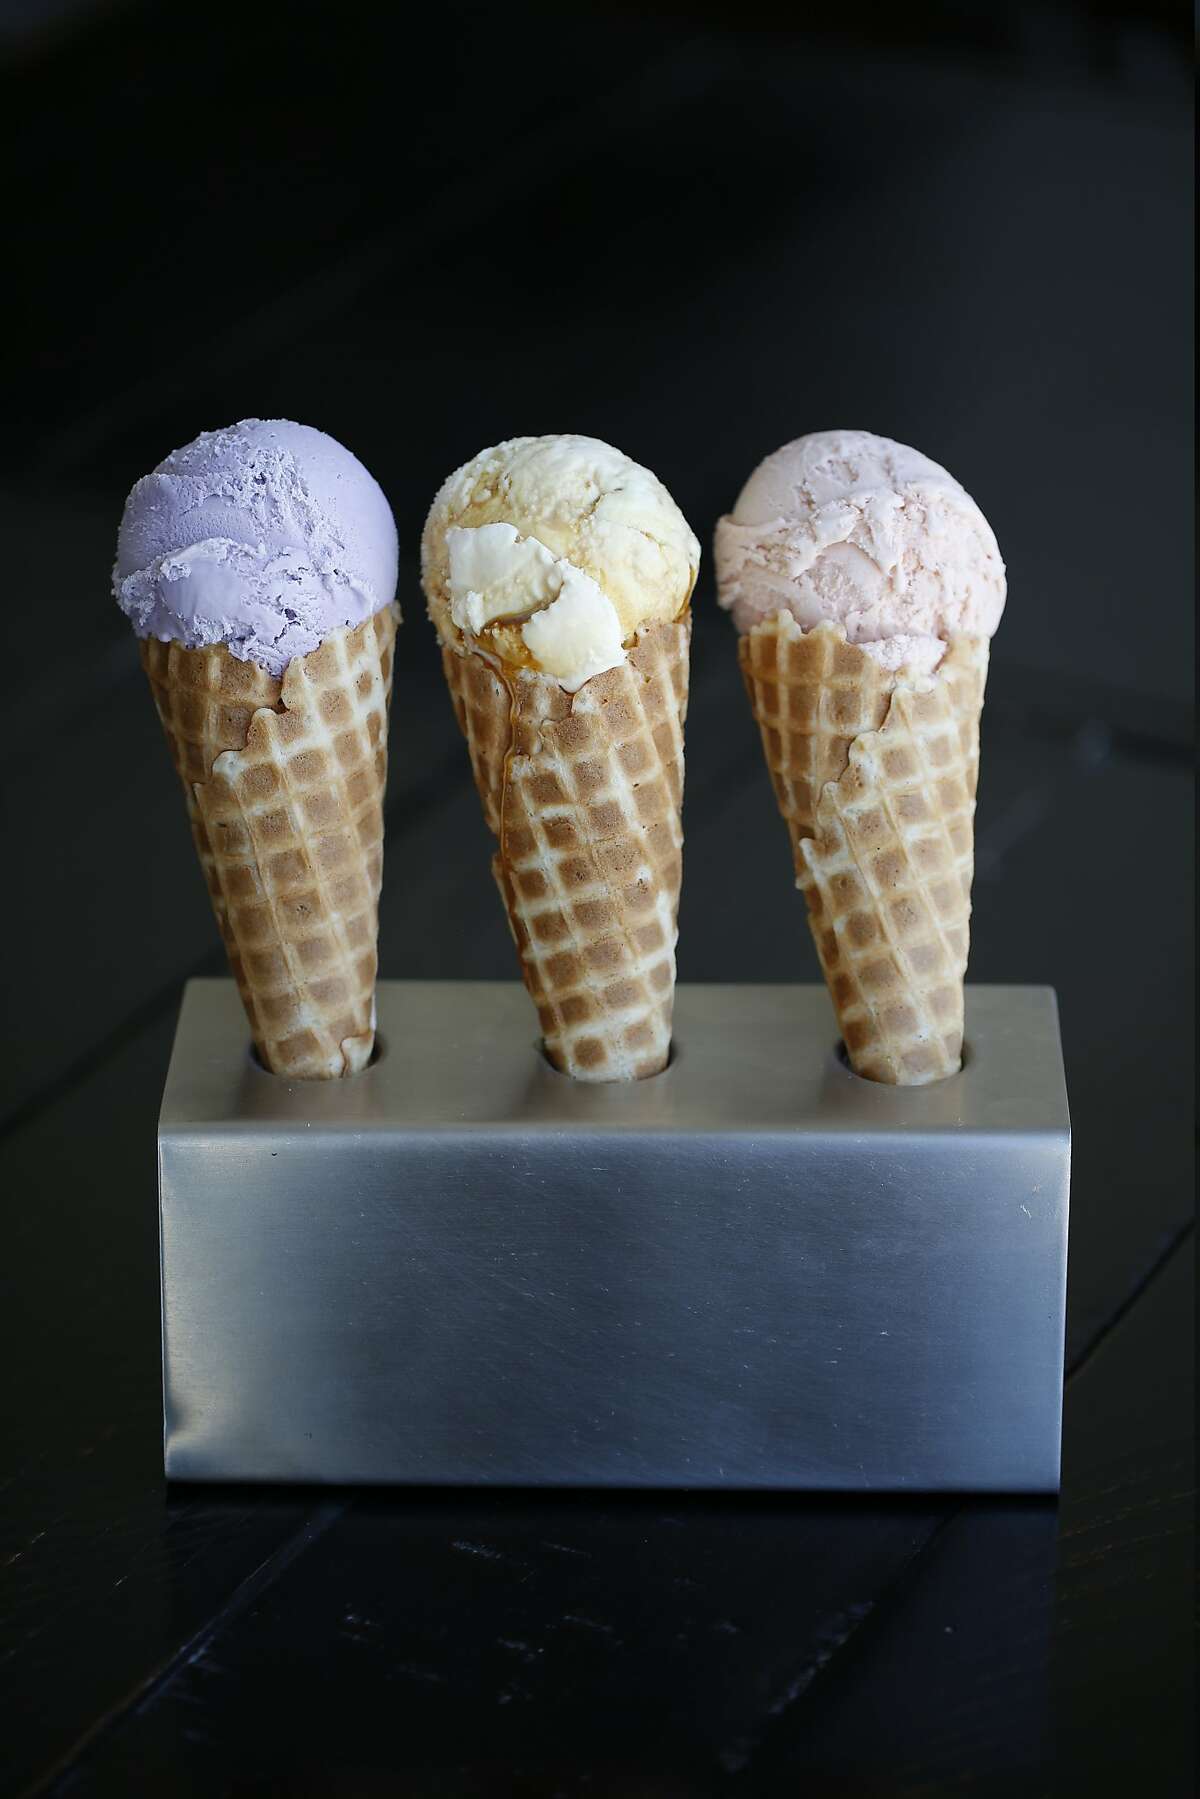 Left to right, Ube (made from purple yams), Flan, and Fruity Pebbles Ice Cream is featured at Mr. and Mrs. Miscellaneous on Monday, July 16, 2018 in San Francisco, Calif.